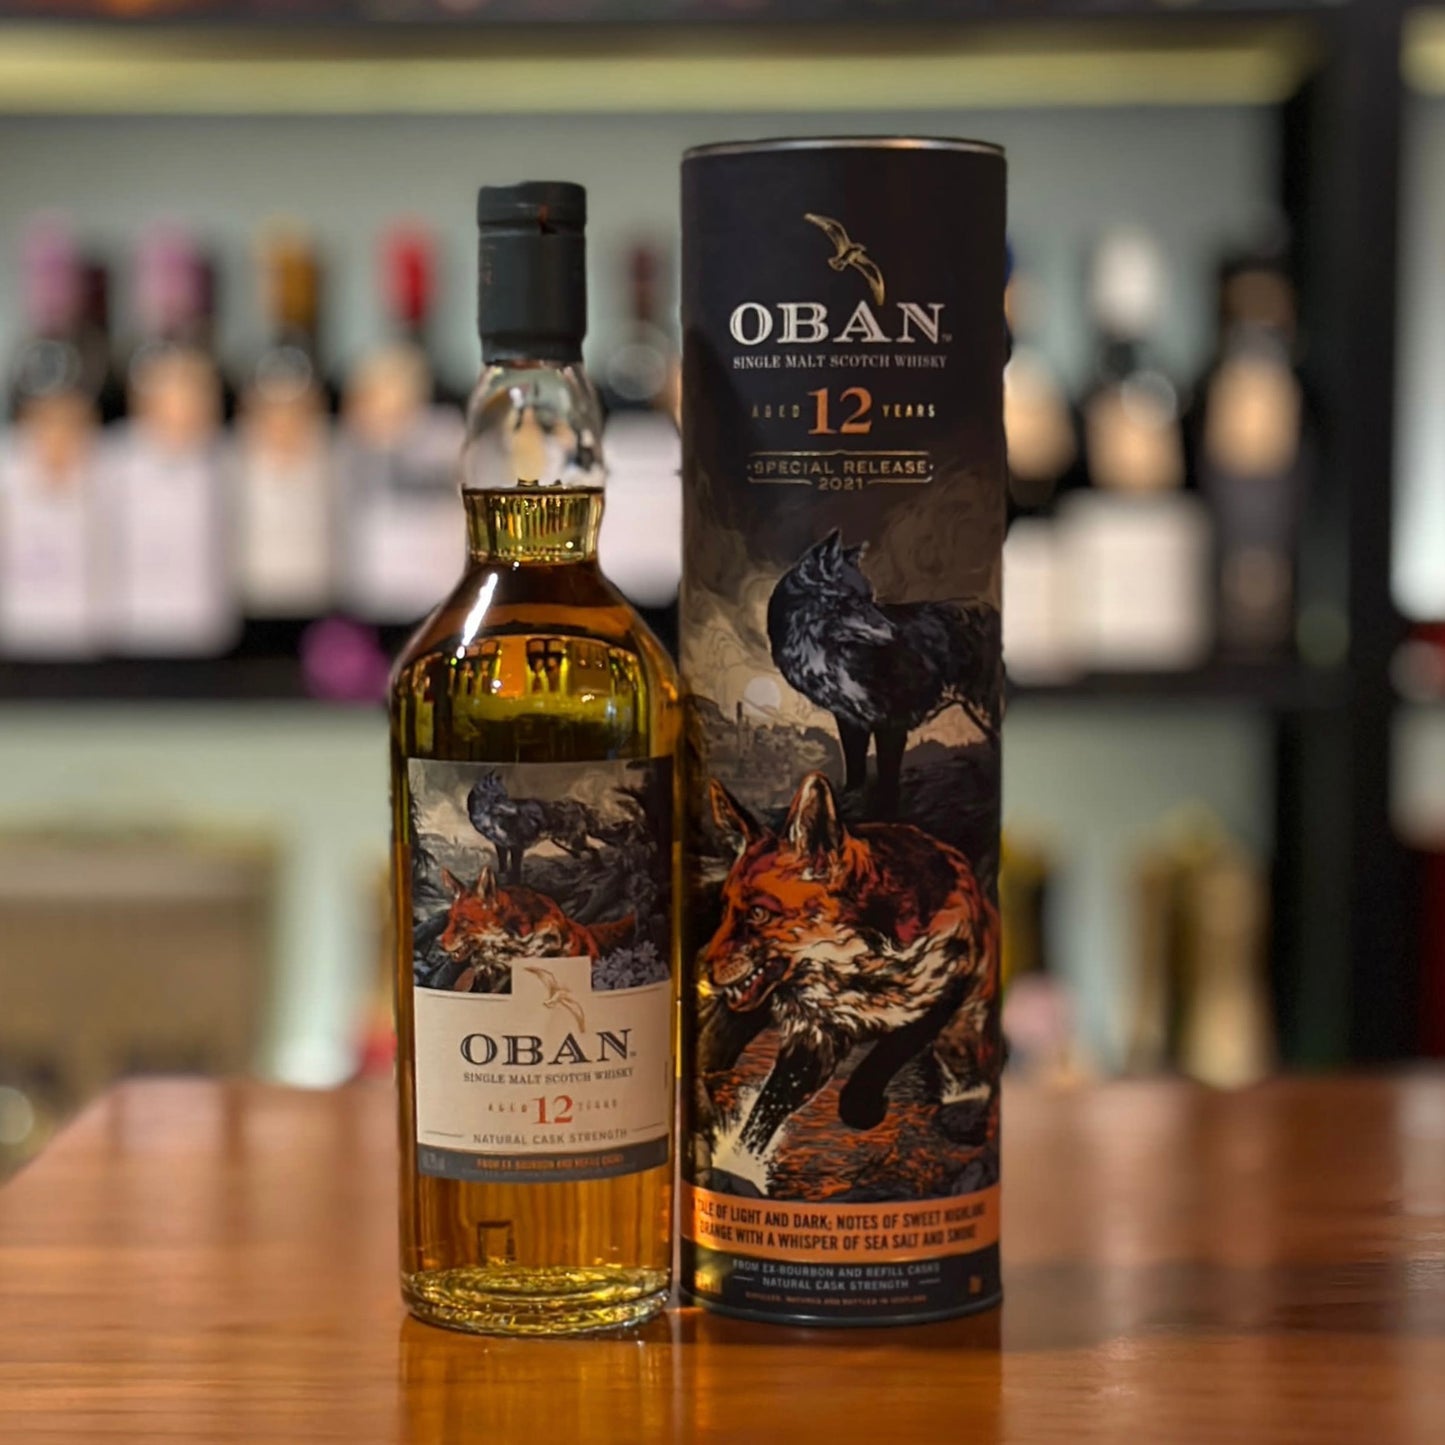 Oban 12 Year Old Diageo Special Release 2021 Single Malt Scotch Whisky